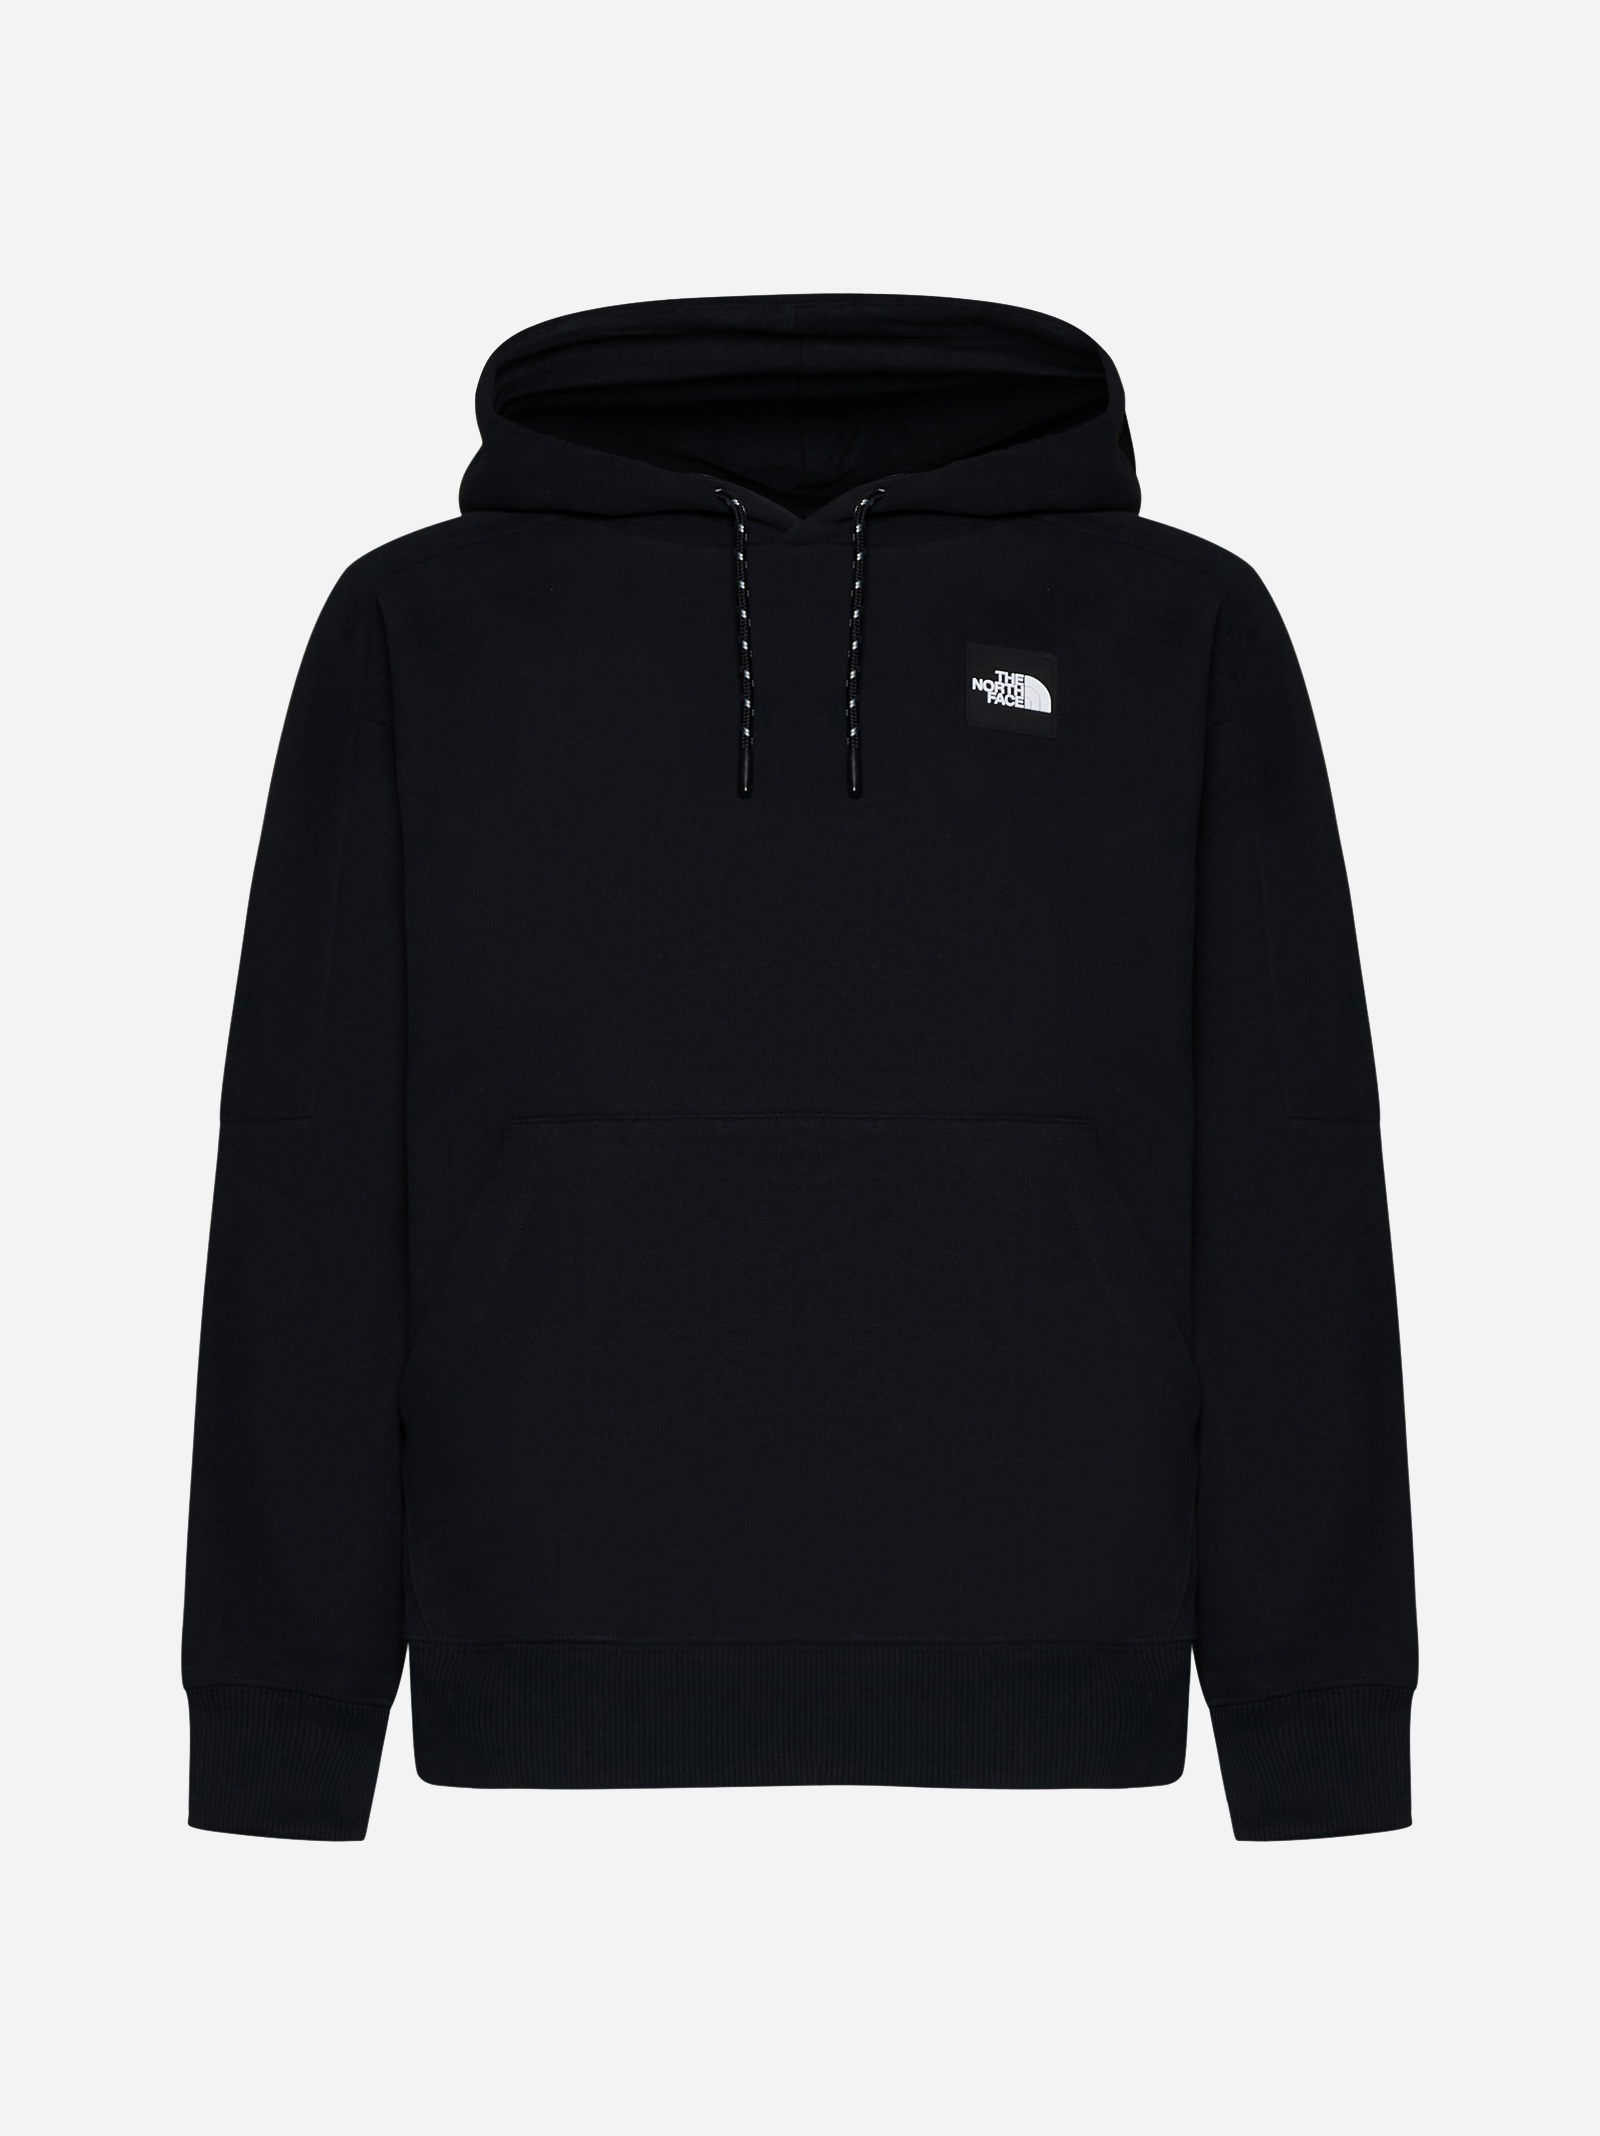 The 489 cotton hoodie - 1